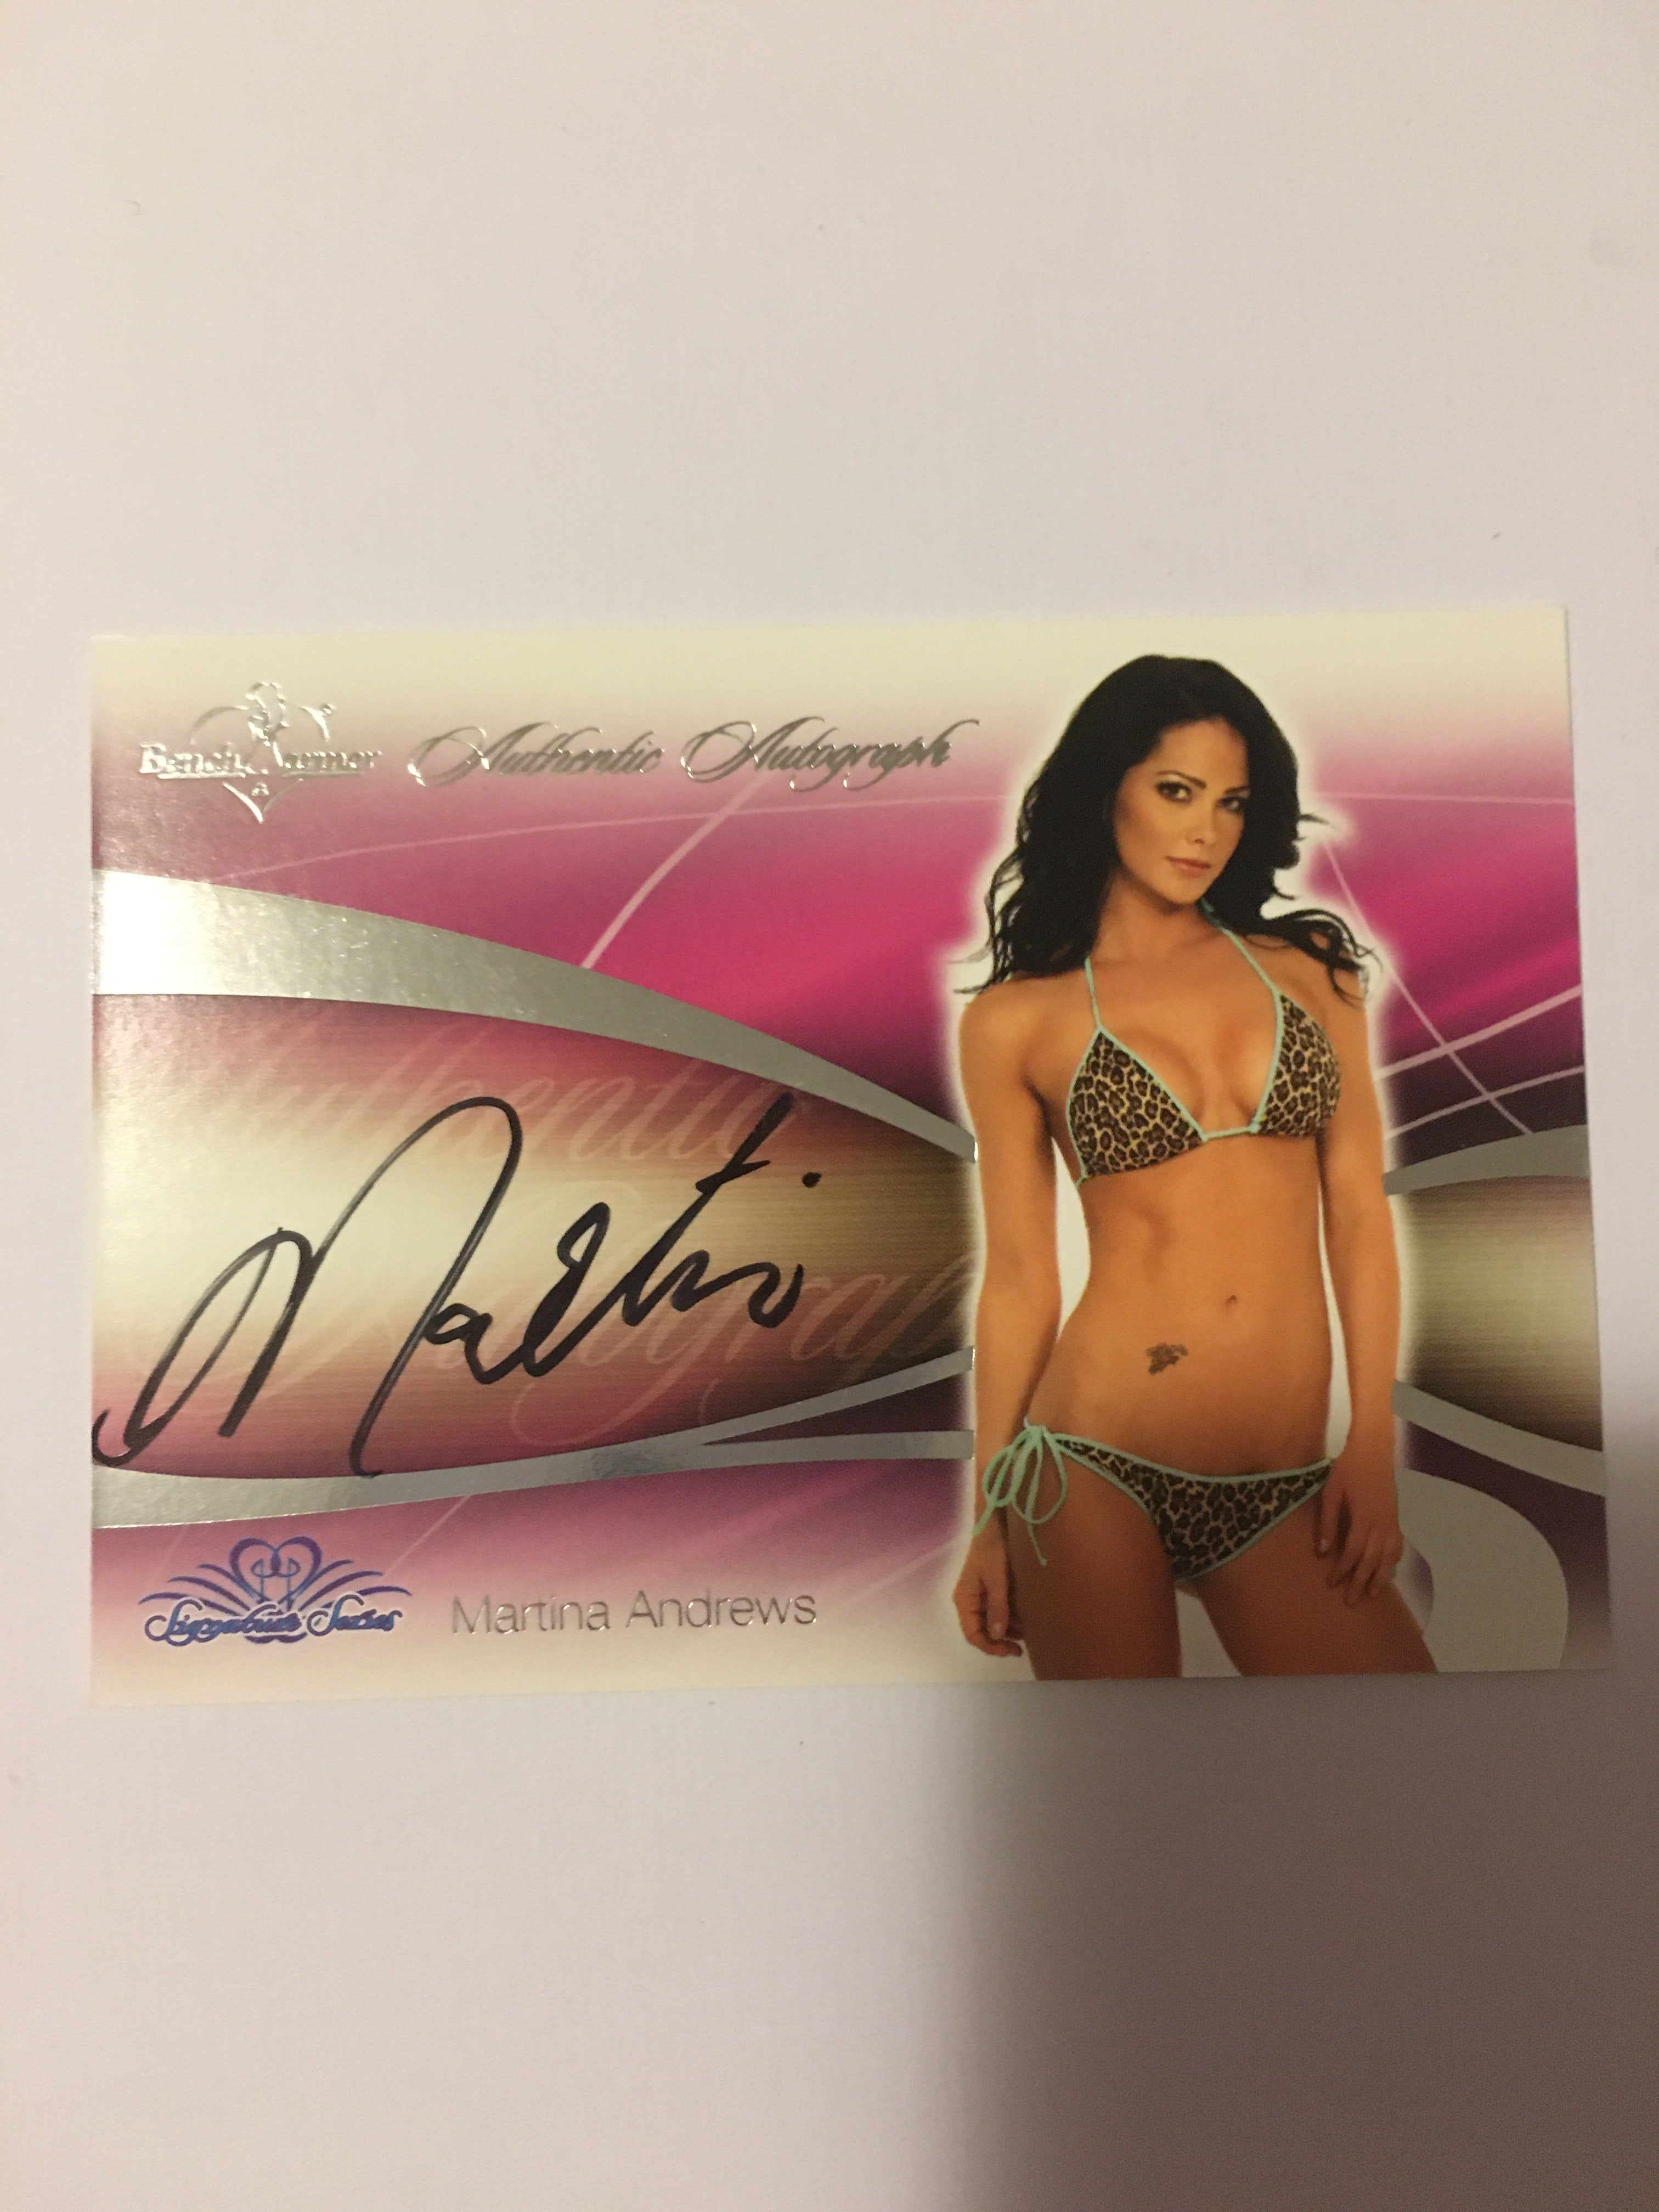 Martina Andrews - Autographed Benchwarmer Trading Card (4)